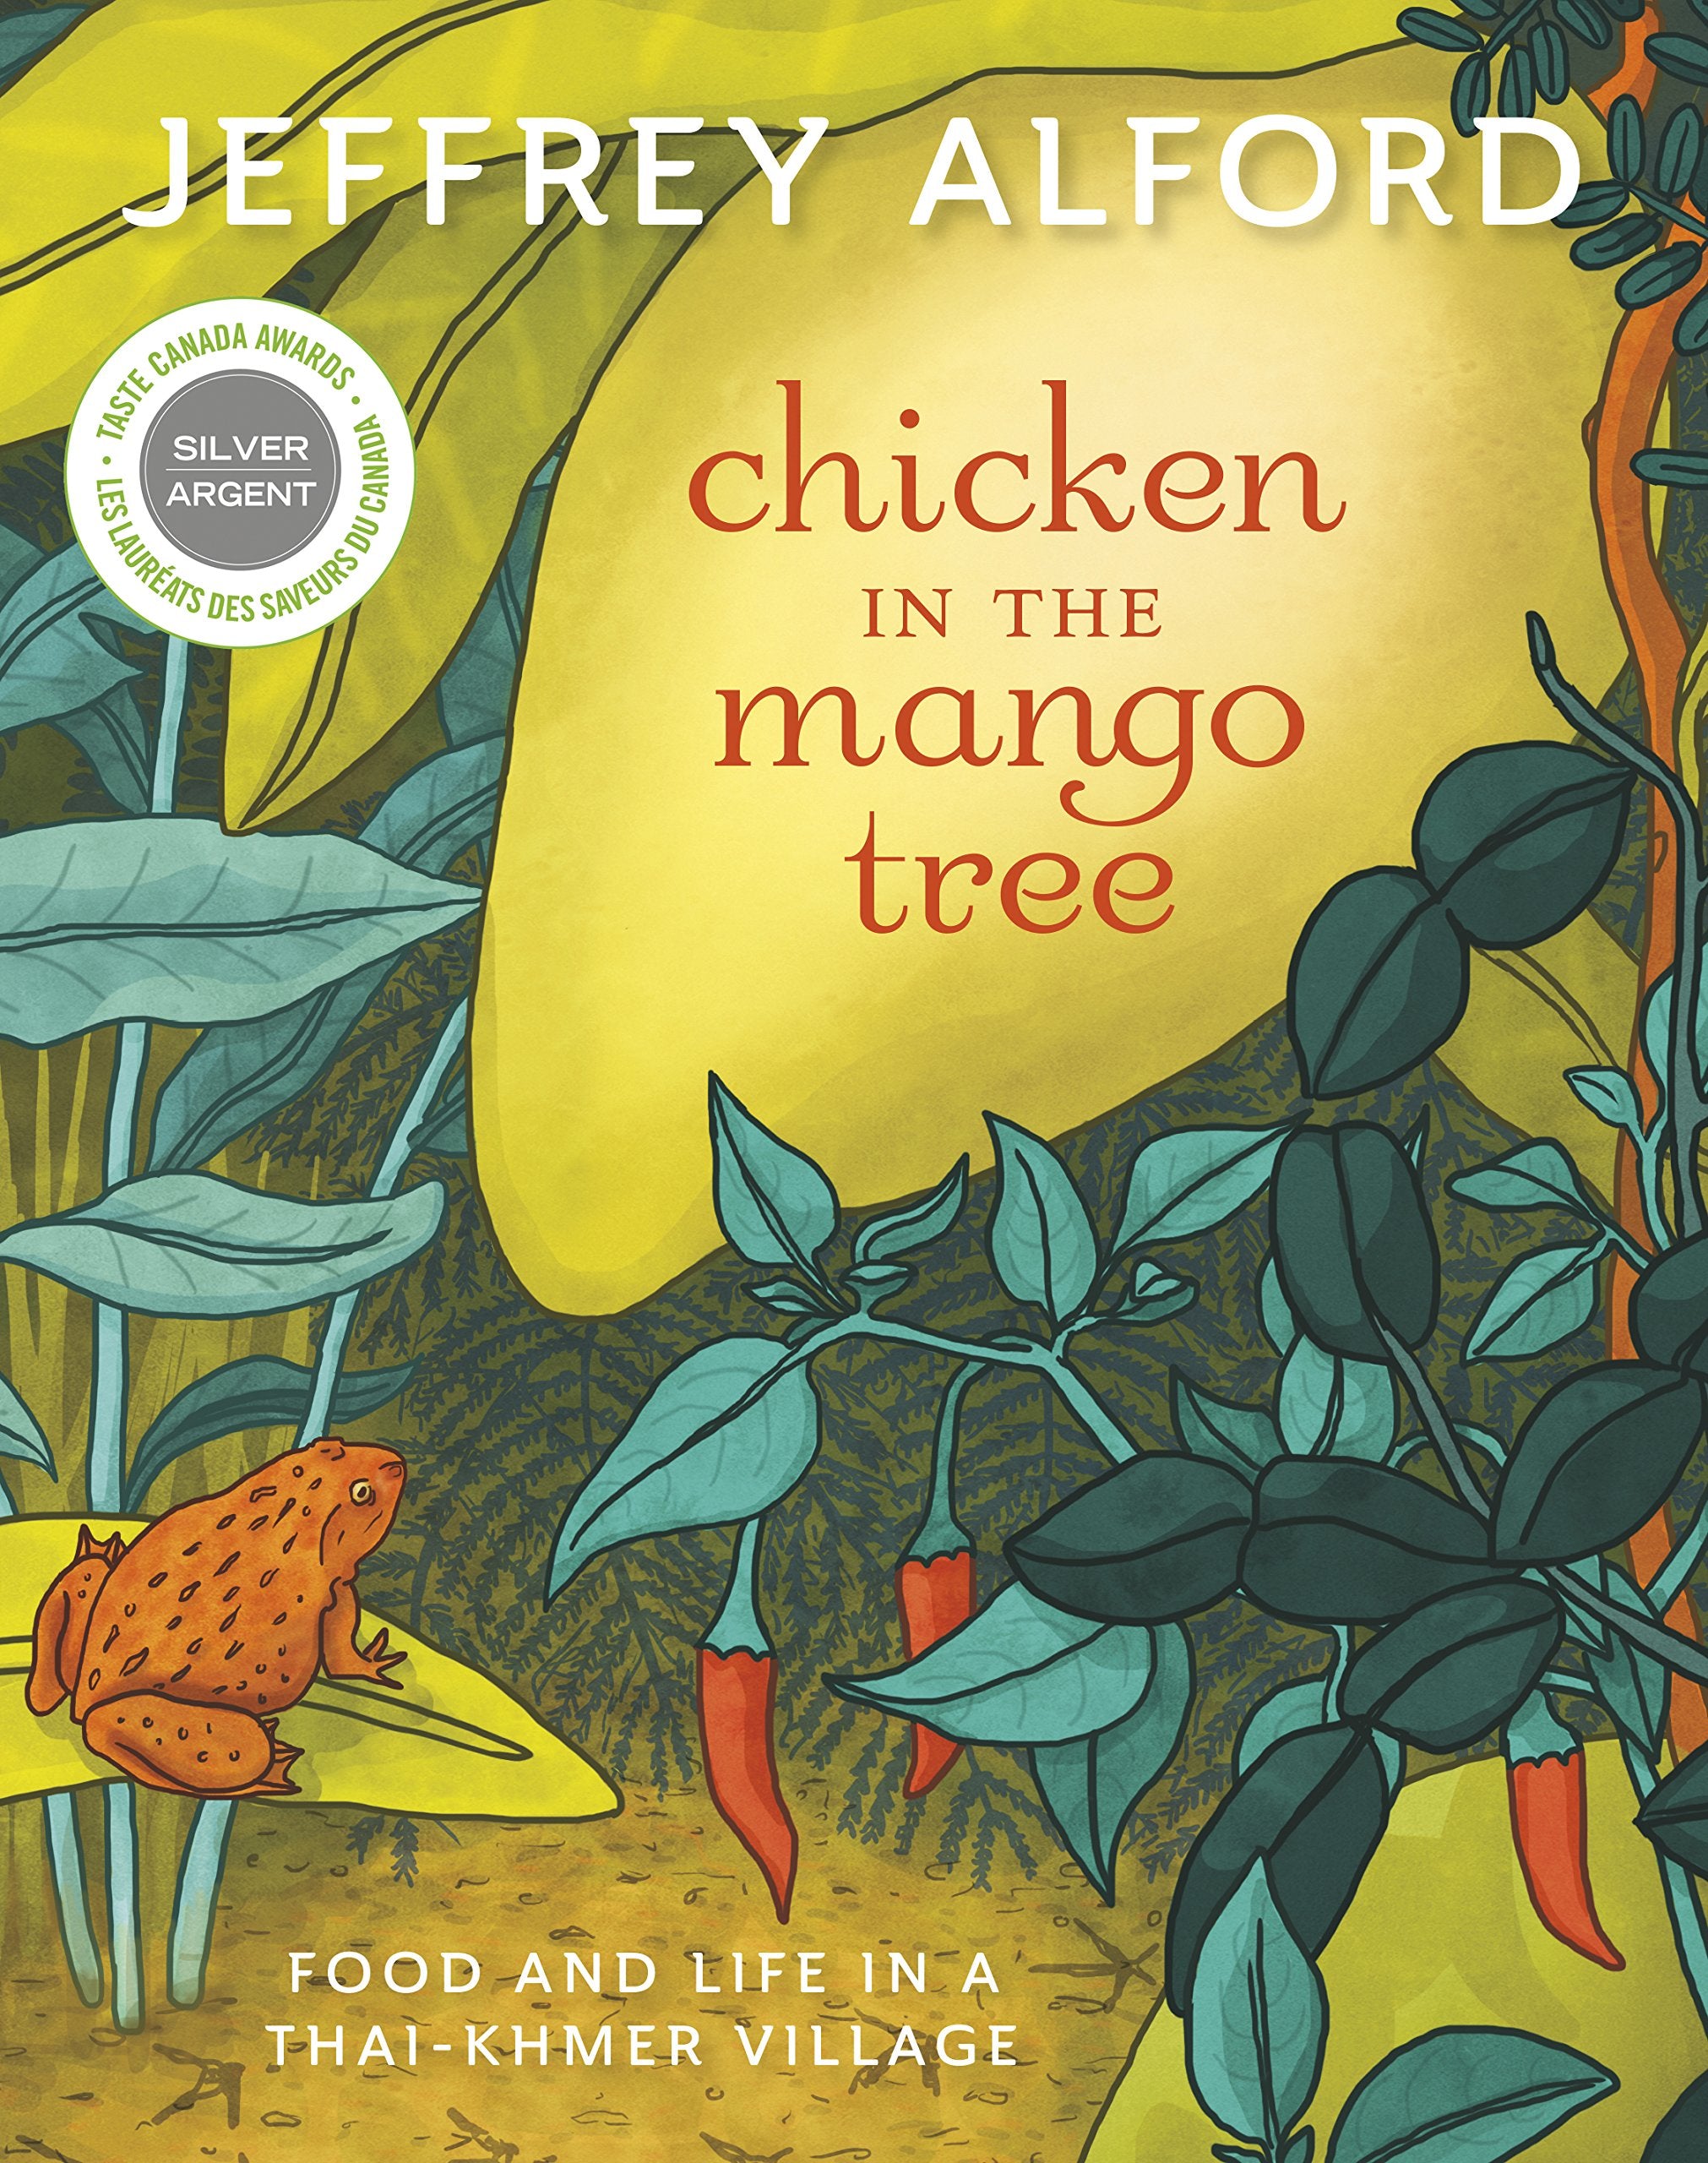 Chicken in the Mango Tree: Food and Life in a Thai-Khmer Village (Jeffrey Alford)